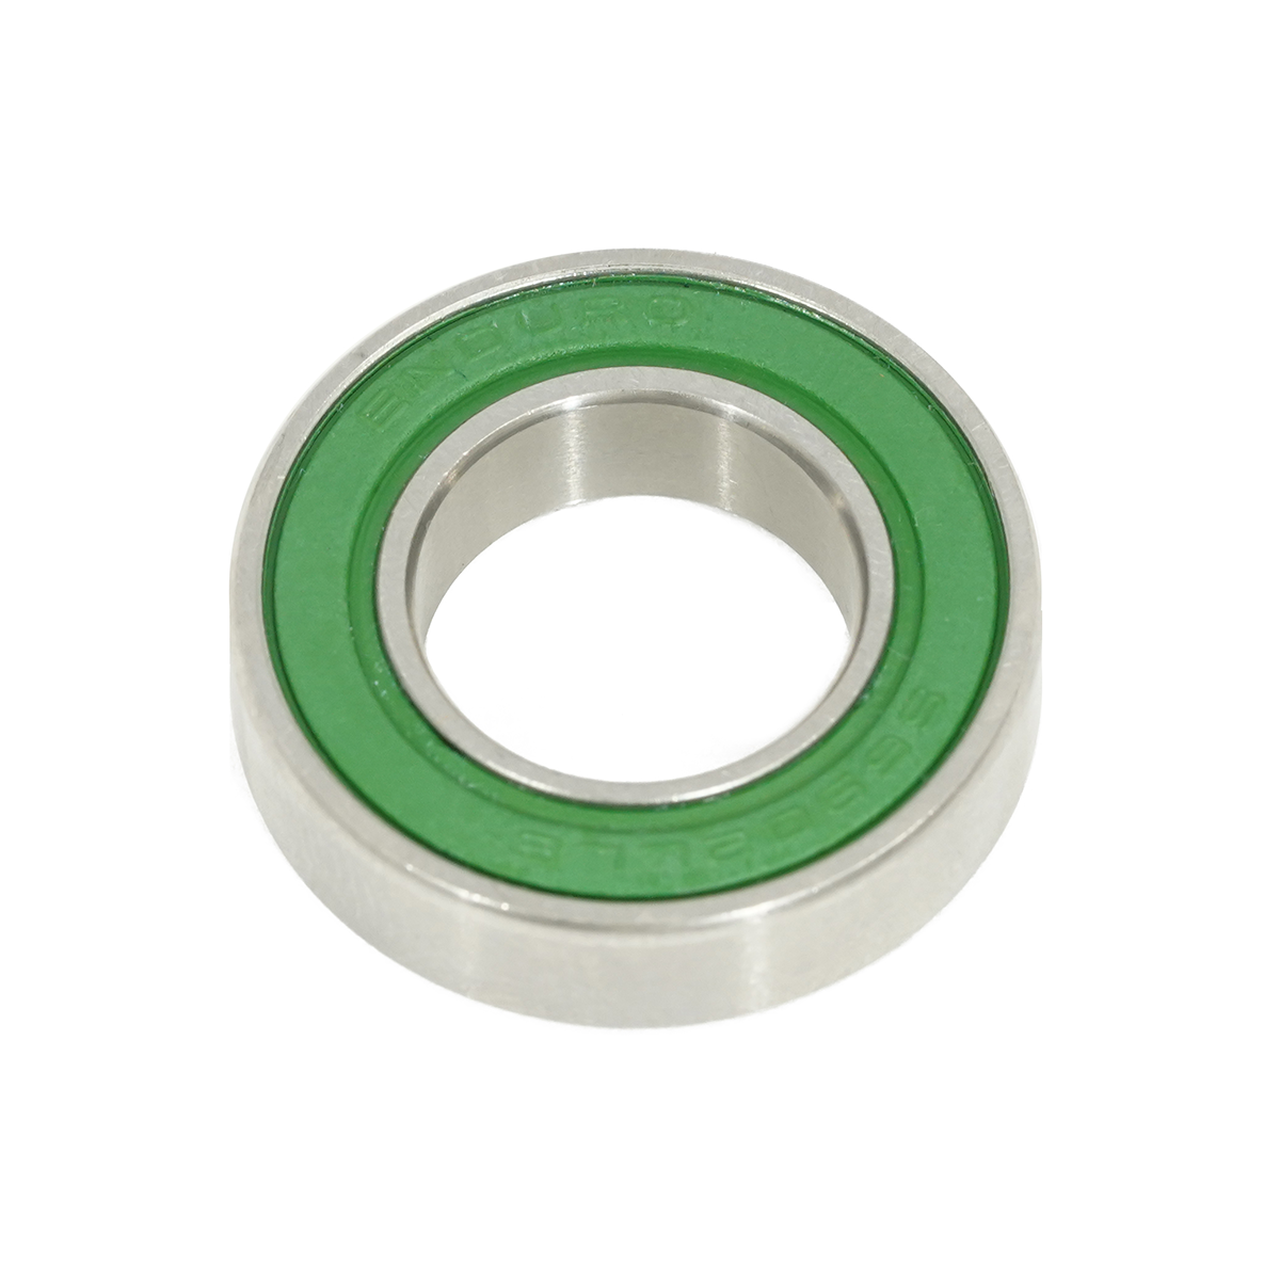 Enduro S6902 LLB - Stainless Steel Radial Bearing (C3 Clearance) - 15mm x 28mm x 7mm